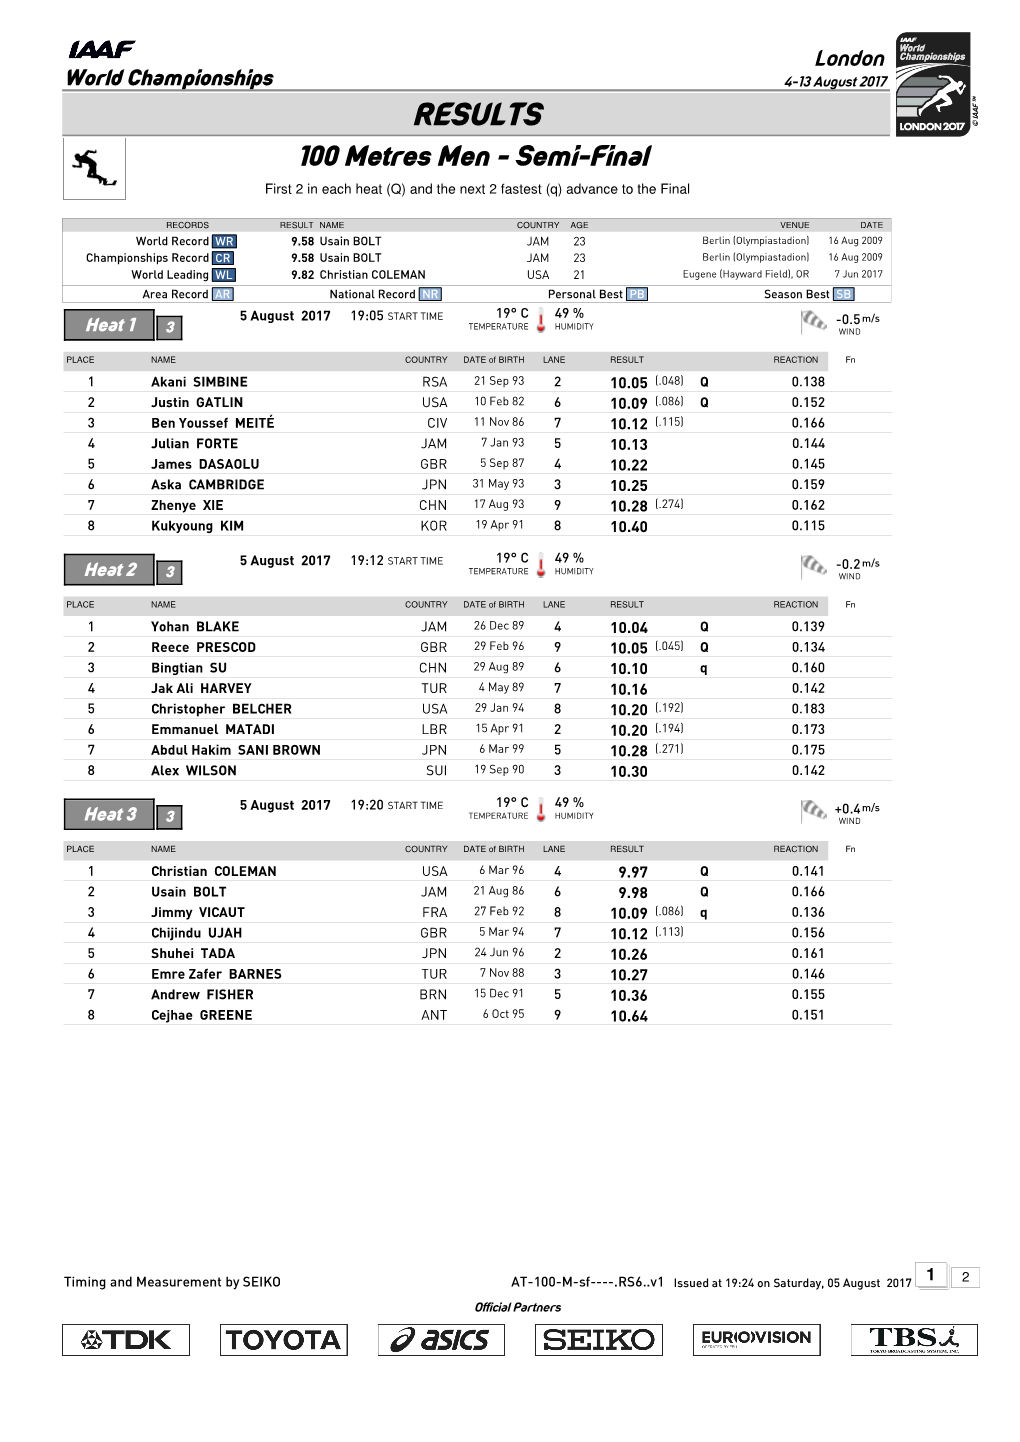 RESULTS 100 Metres Men - Semi-Final First 2 in Each Heat (Q) and the Next 2 Fastest (Q) Advance to the Final